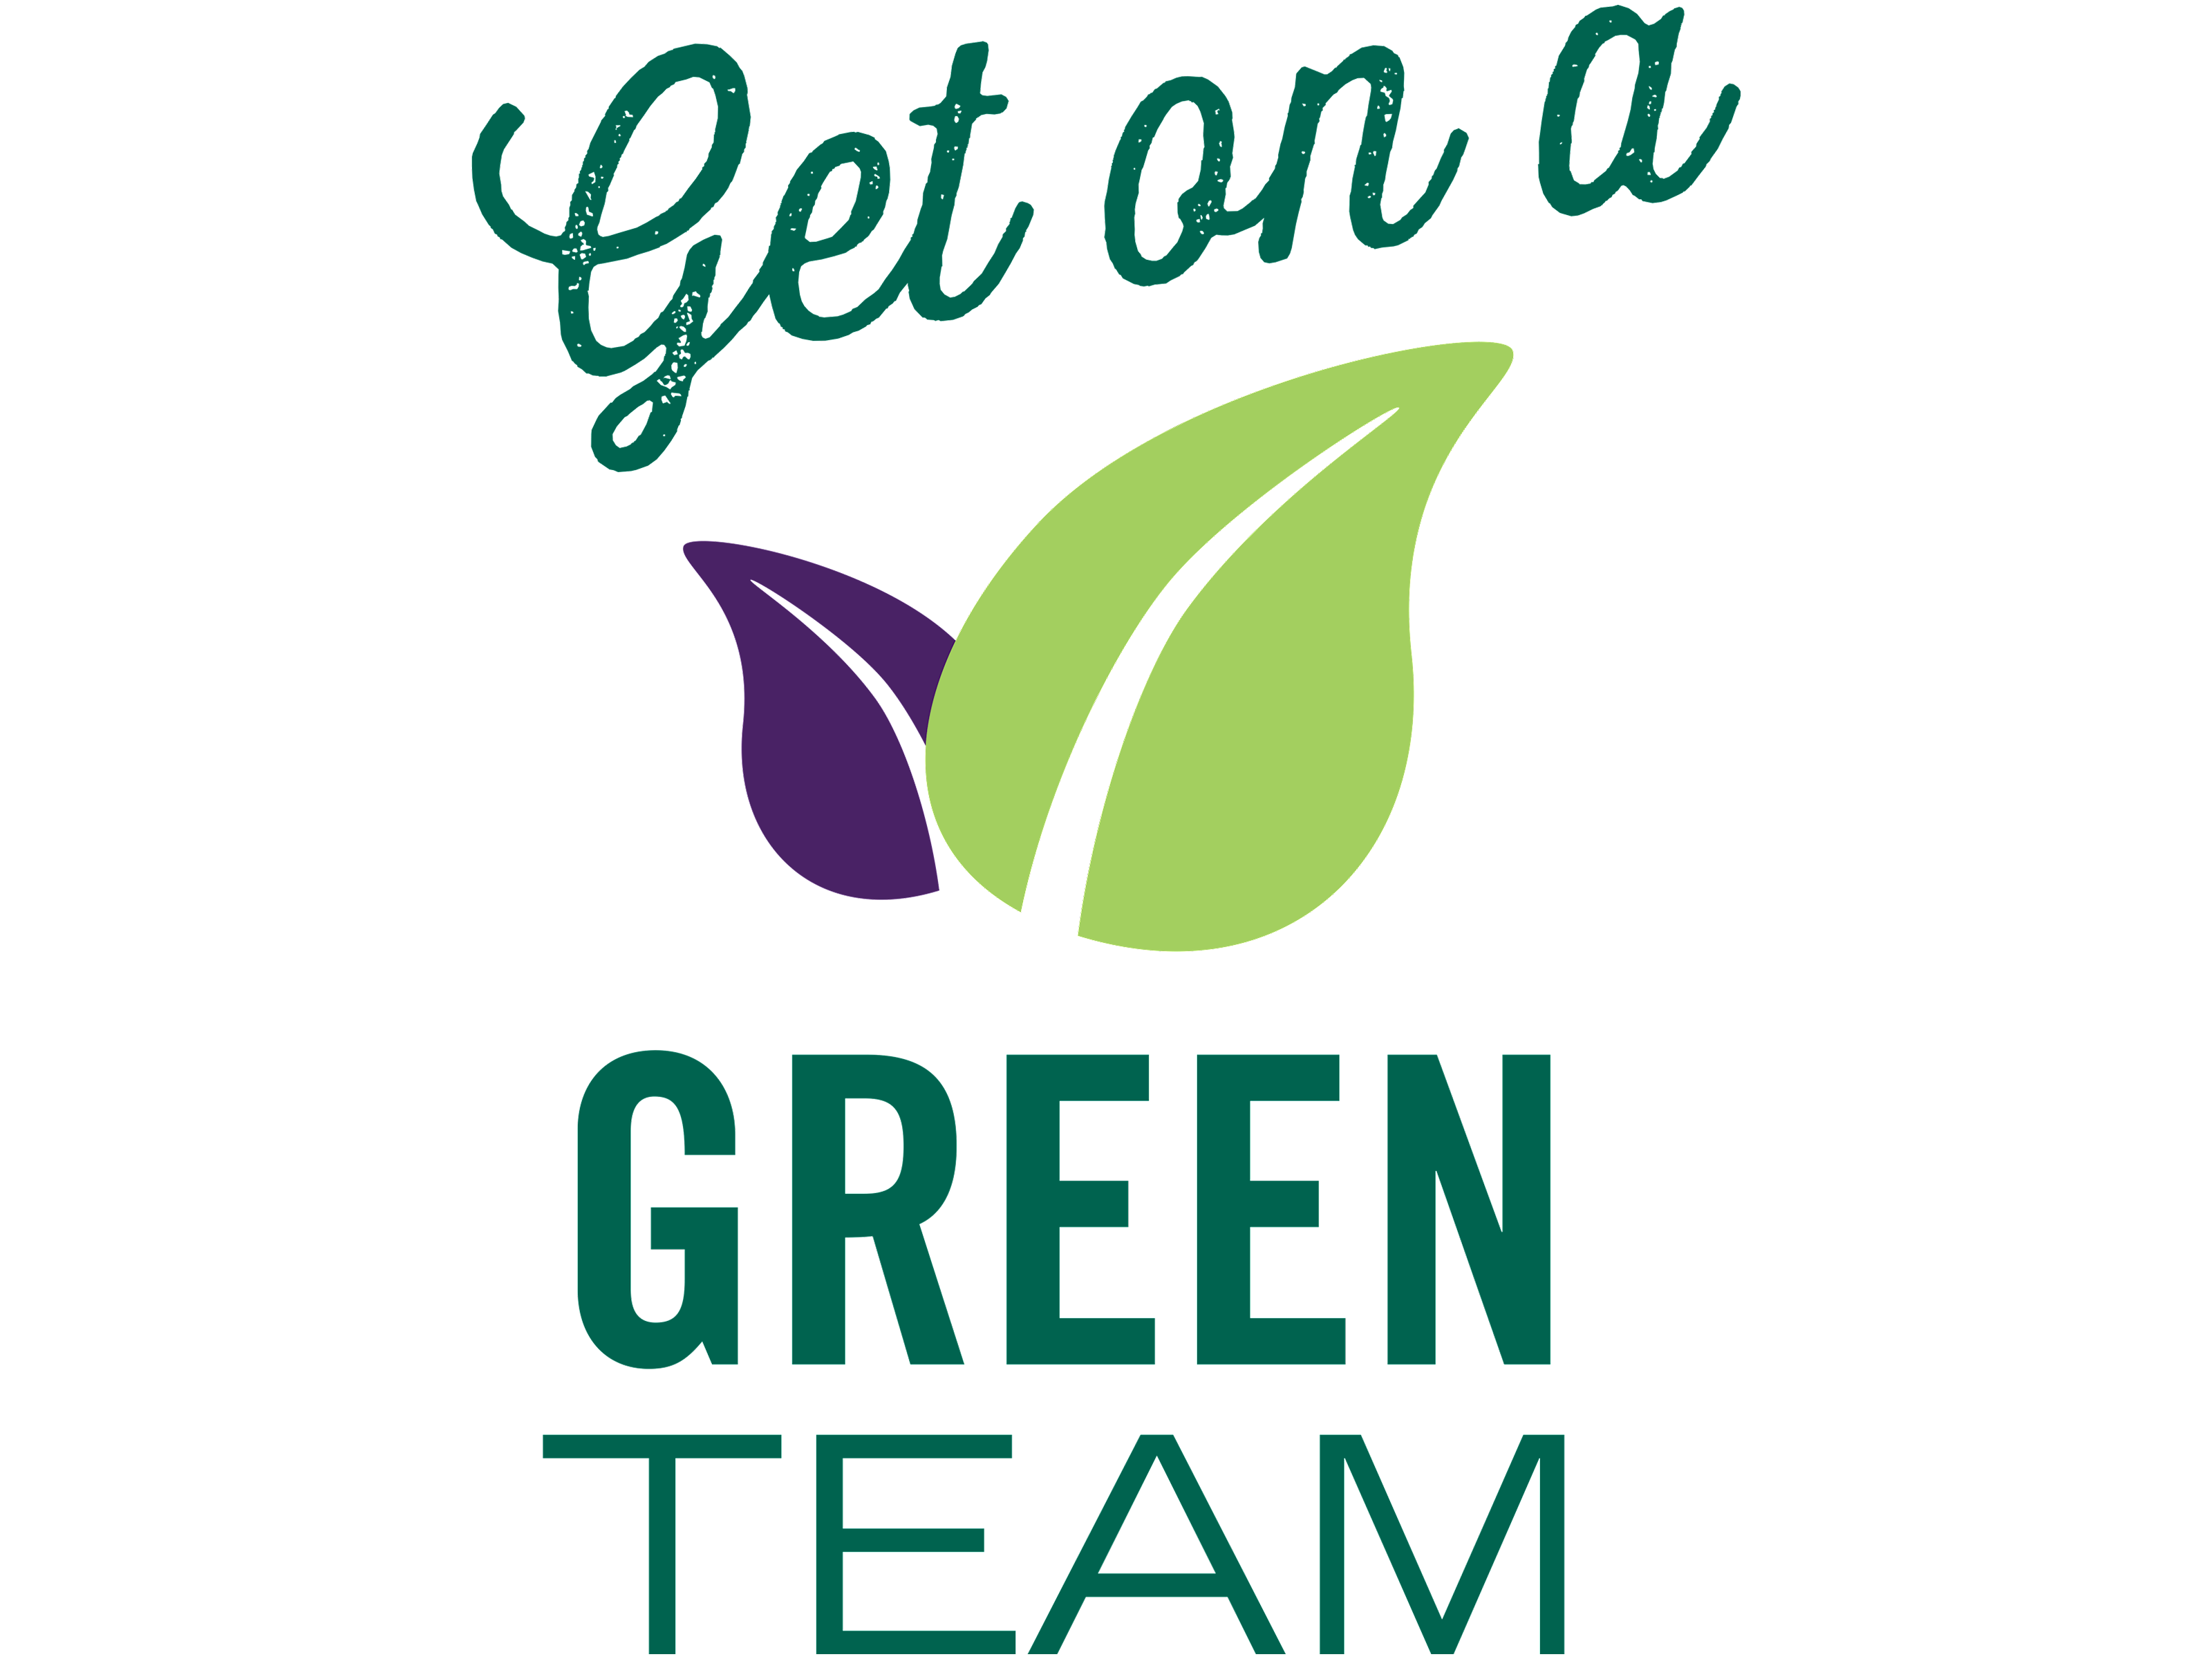 "Get on the Green Team" logo with small purple leaf half behind a large light green leaf.